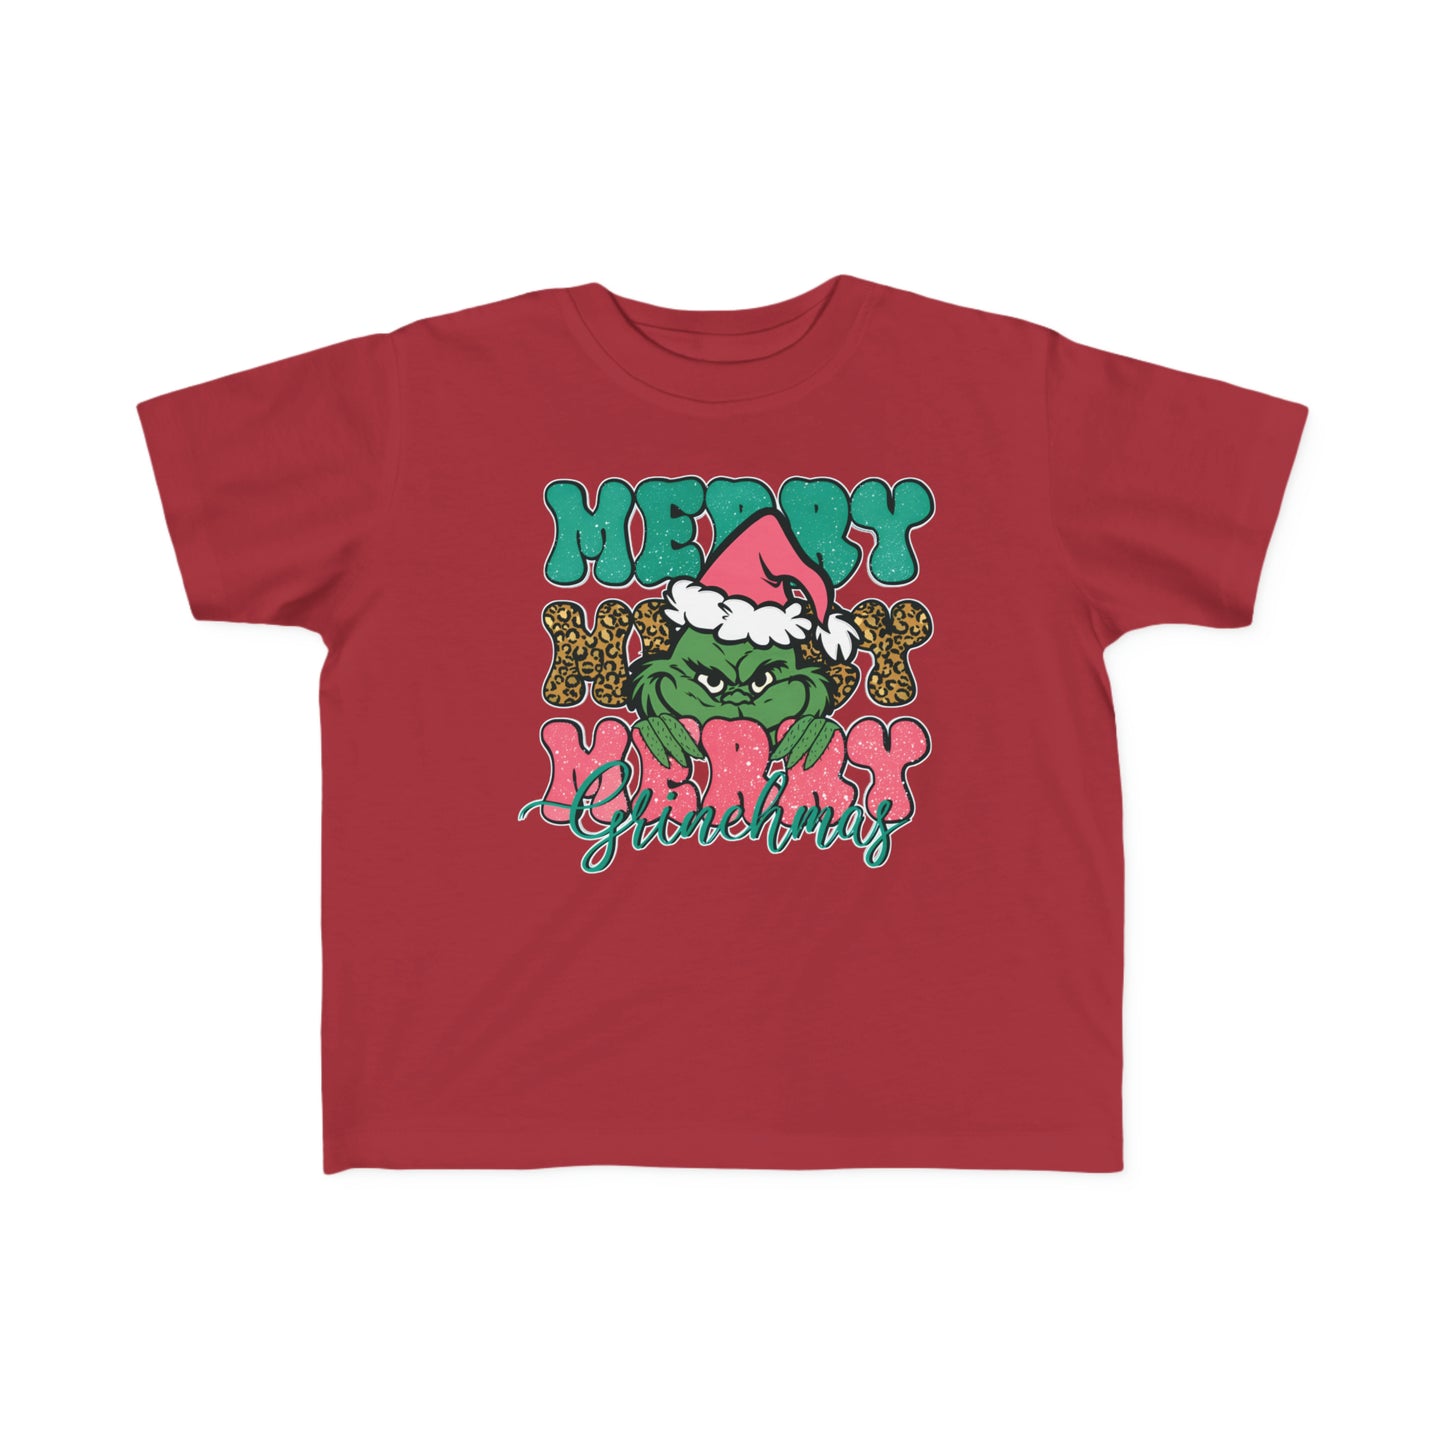 Merry Grinchmas Christmas Toddler's Fine Jersey Tee